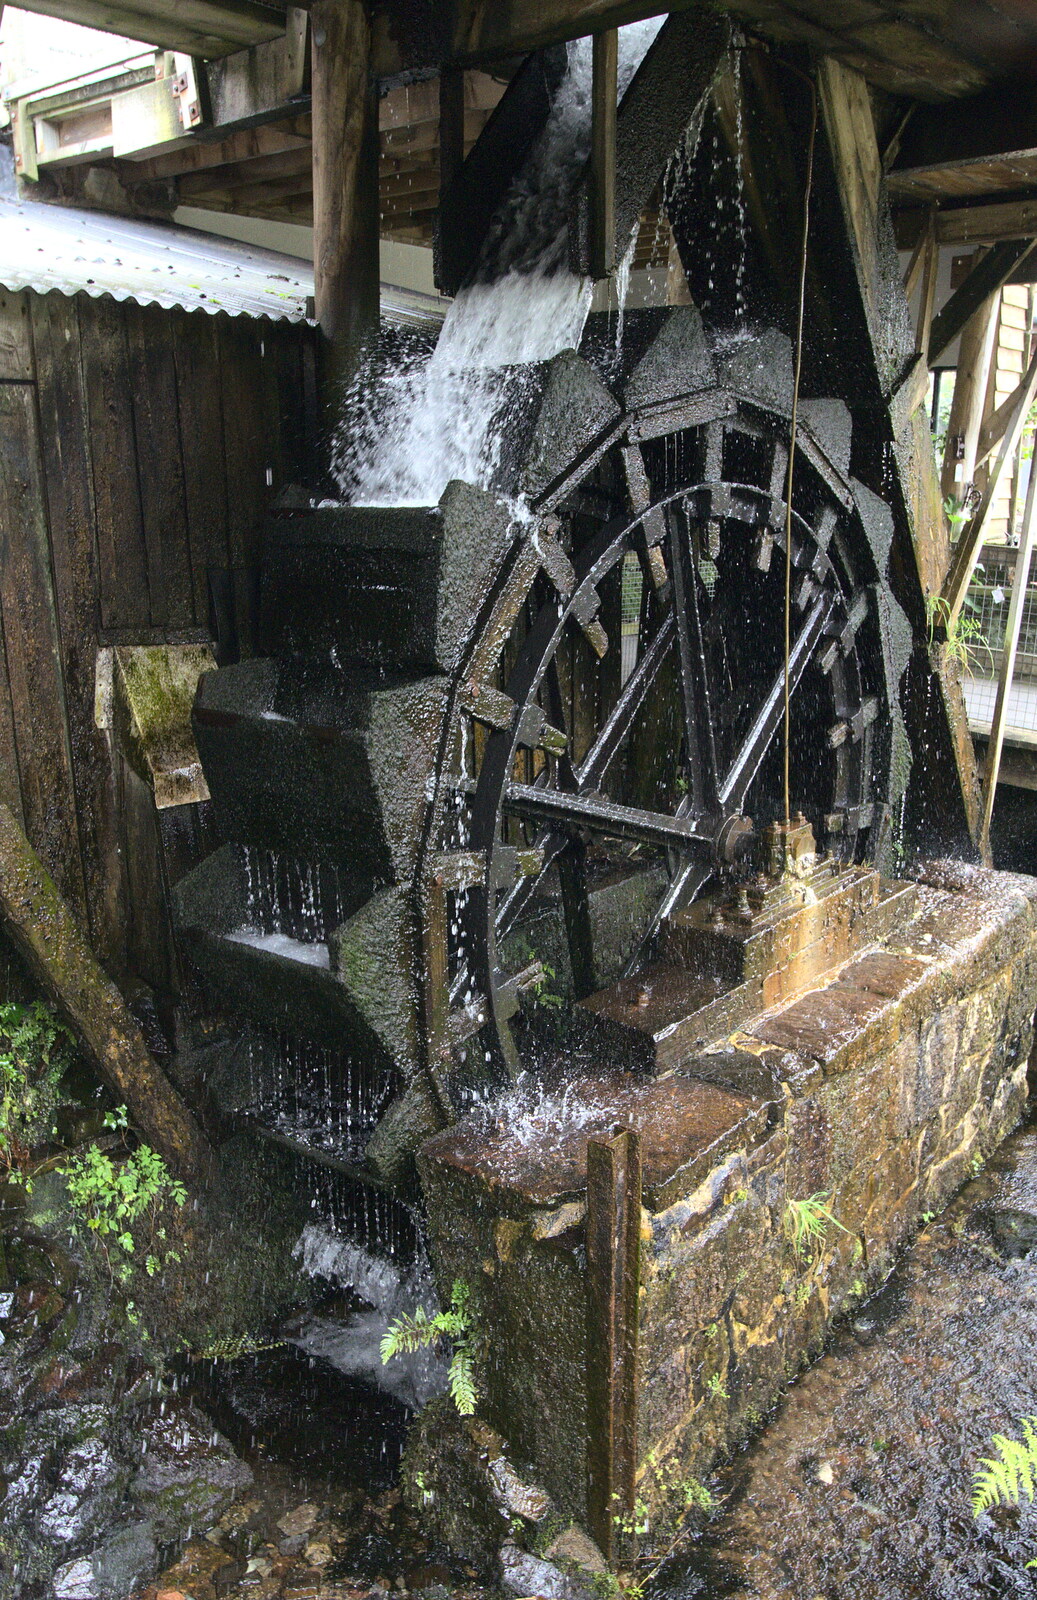 The waterwheel at Finch Foundry from Finch's Foundry and Lydford Gorge, Dartmoor, Devon - 12th August 2016